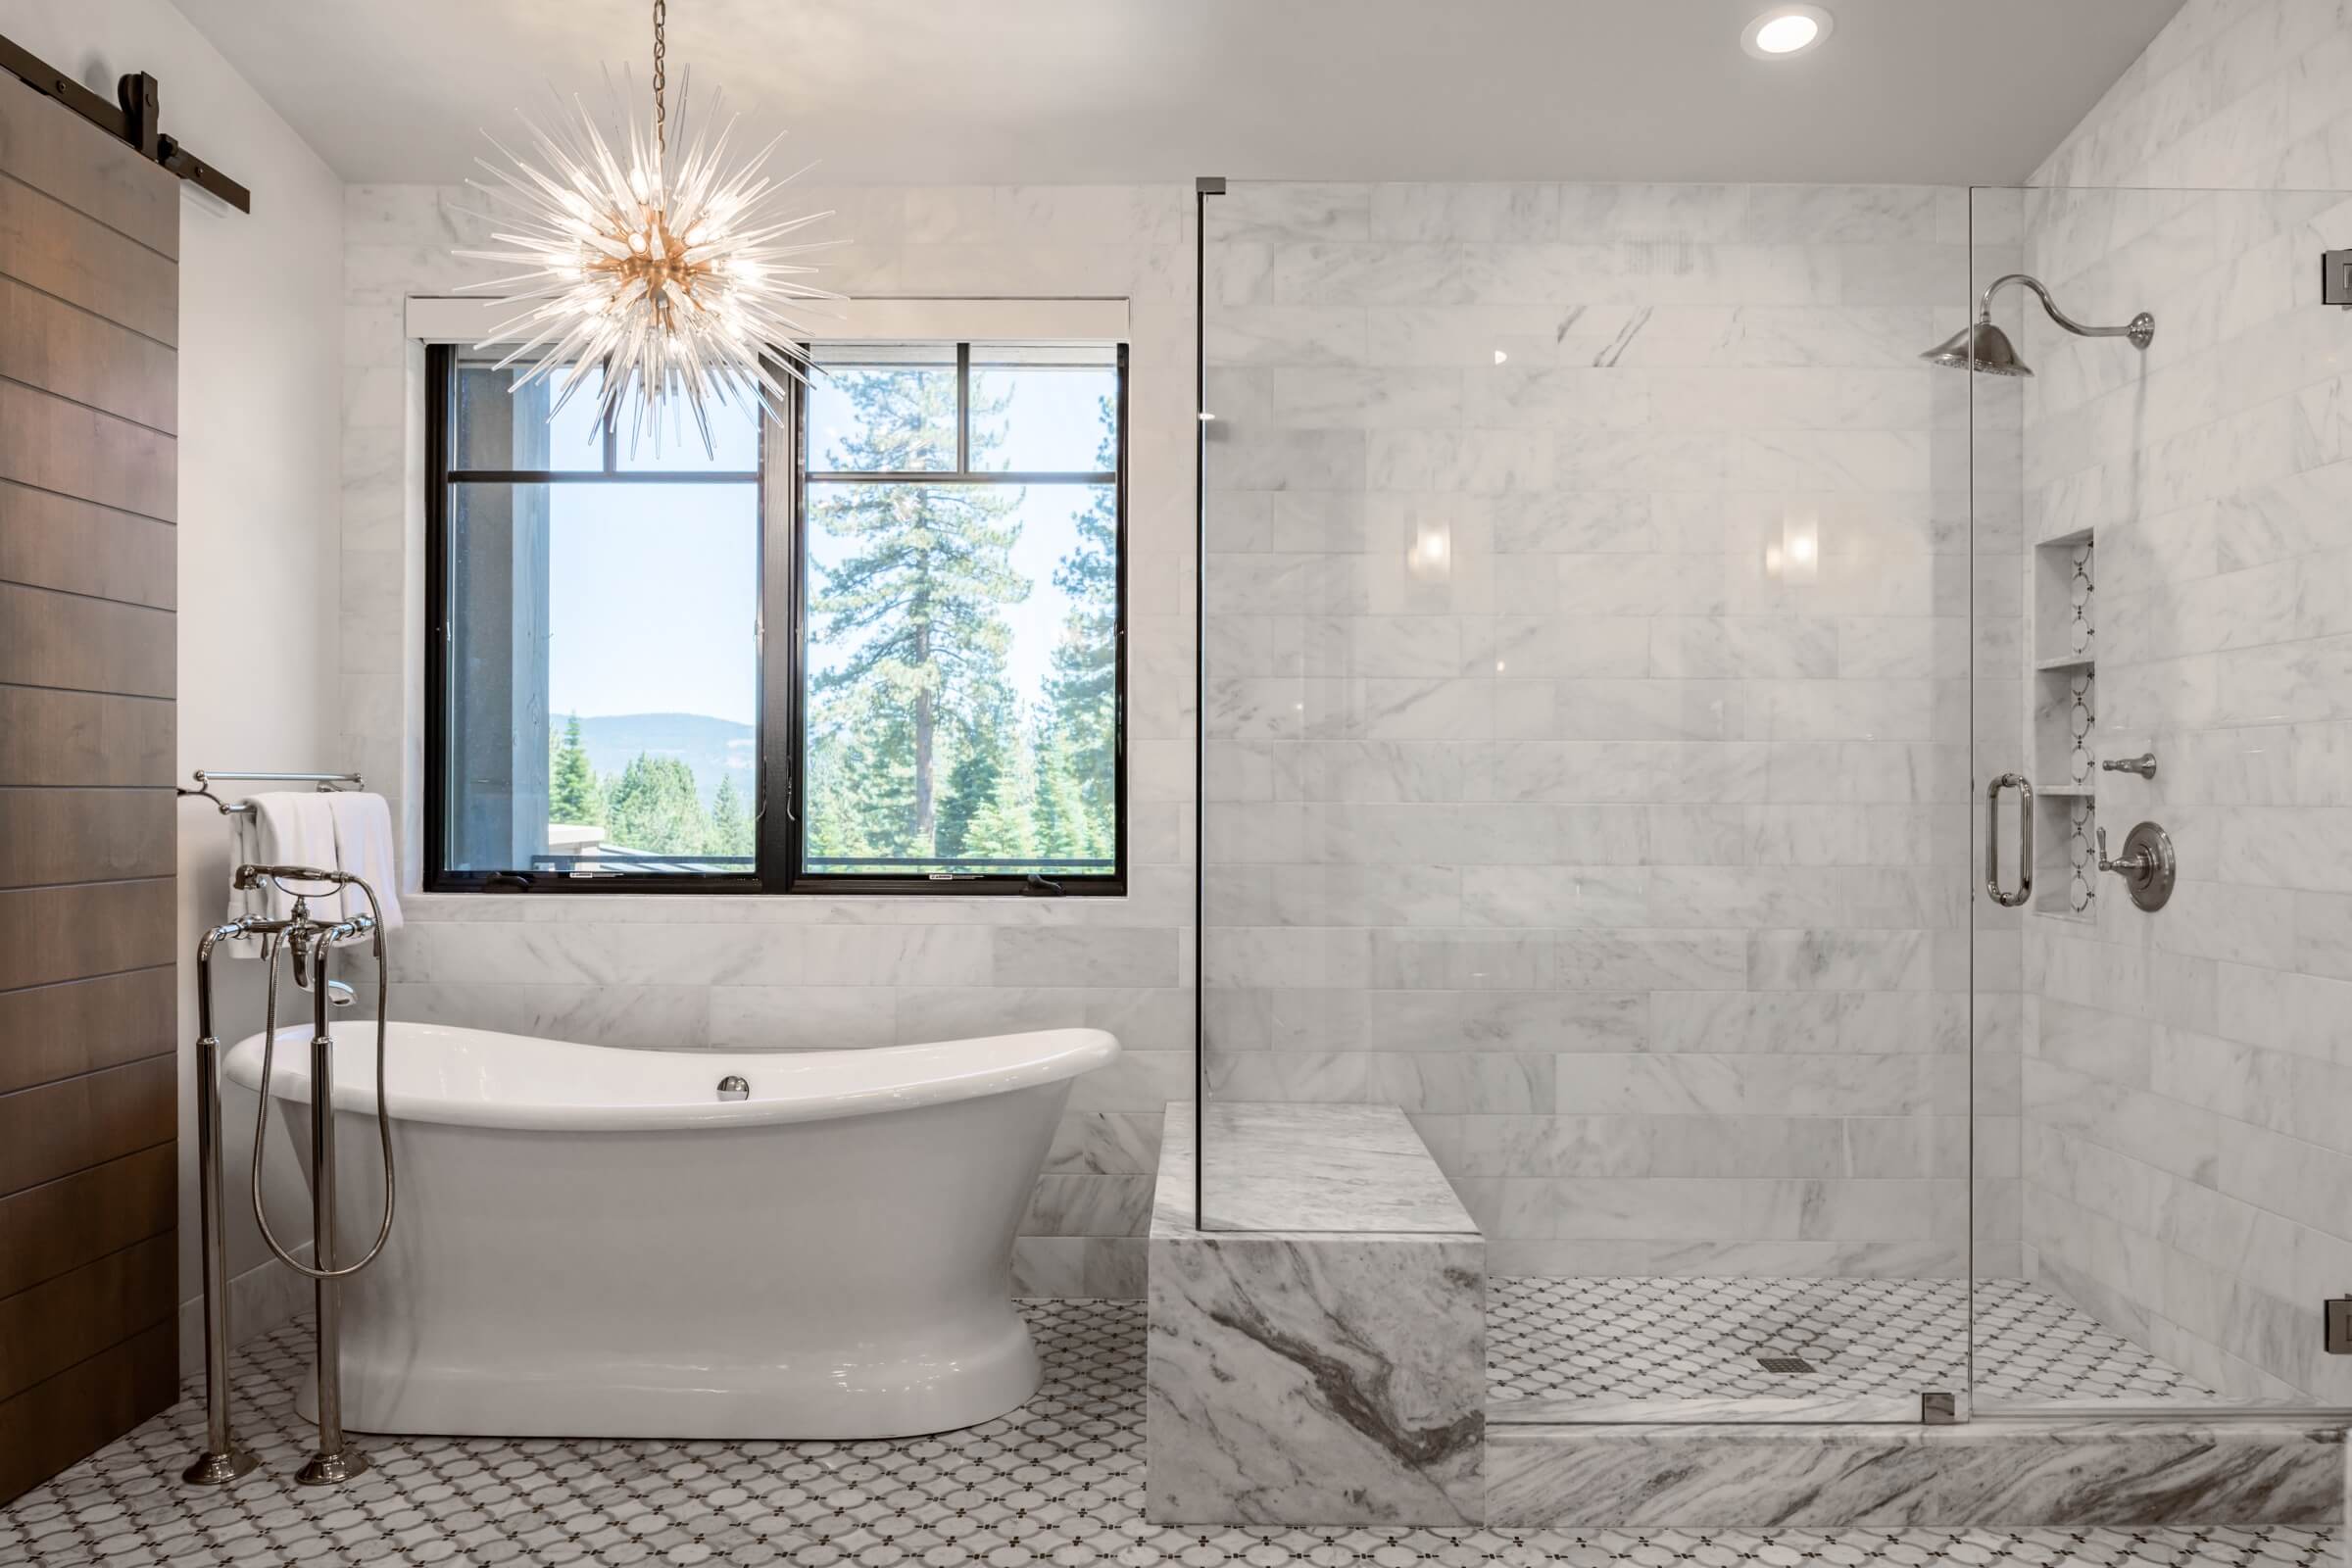 Transitional bathroom design from FiveWest